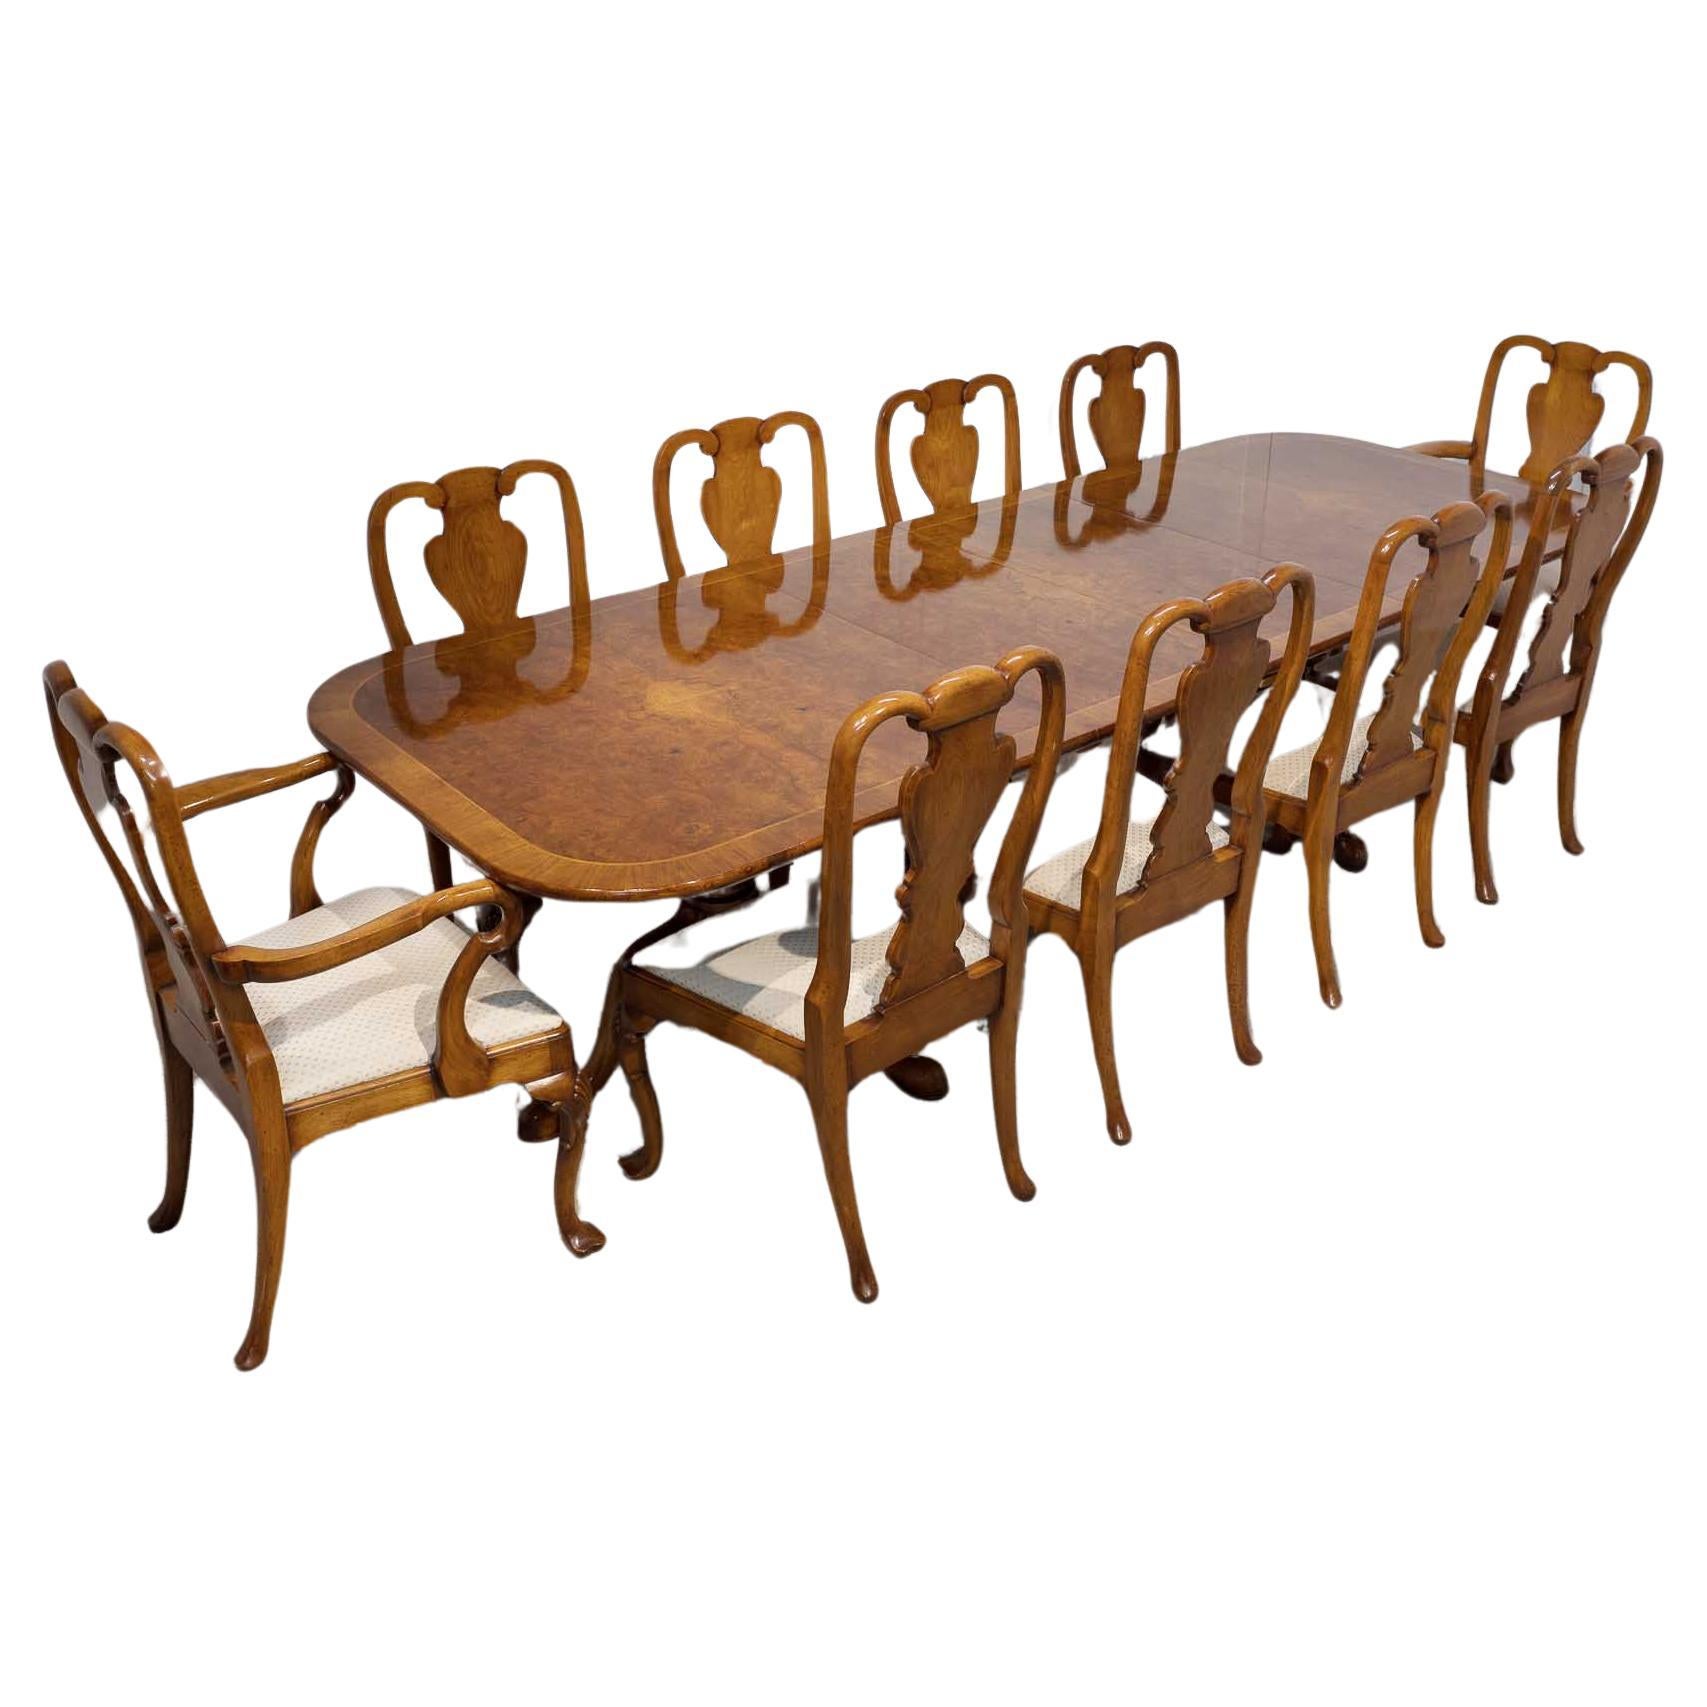 Regency Dining Set Pedestal Table and Queen Anne Chairs Walnut